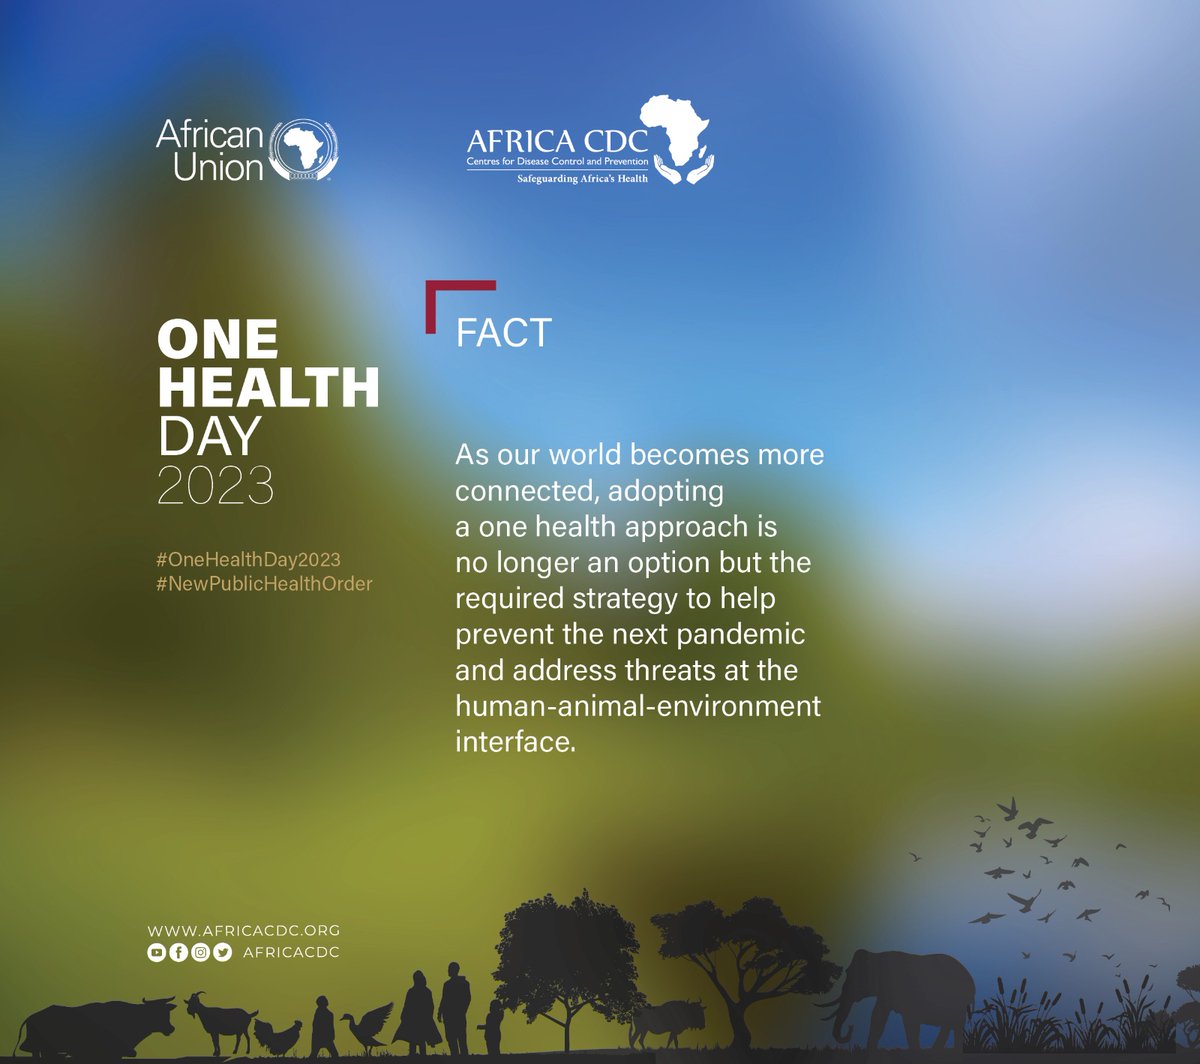 Human, animal, & environmental health are closely interconnected & a threat to one is a threat to all. On this #OneHealthDay2023 we highlight the importance a #OneHealthApproach to protect public health & mitigate against new health threats. 
#NewPublicHealthOrder

@_AfricanUnion